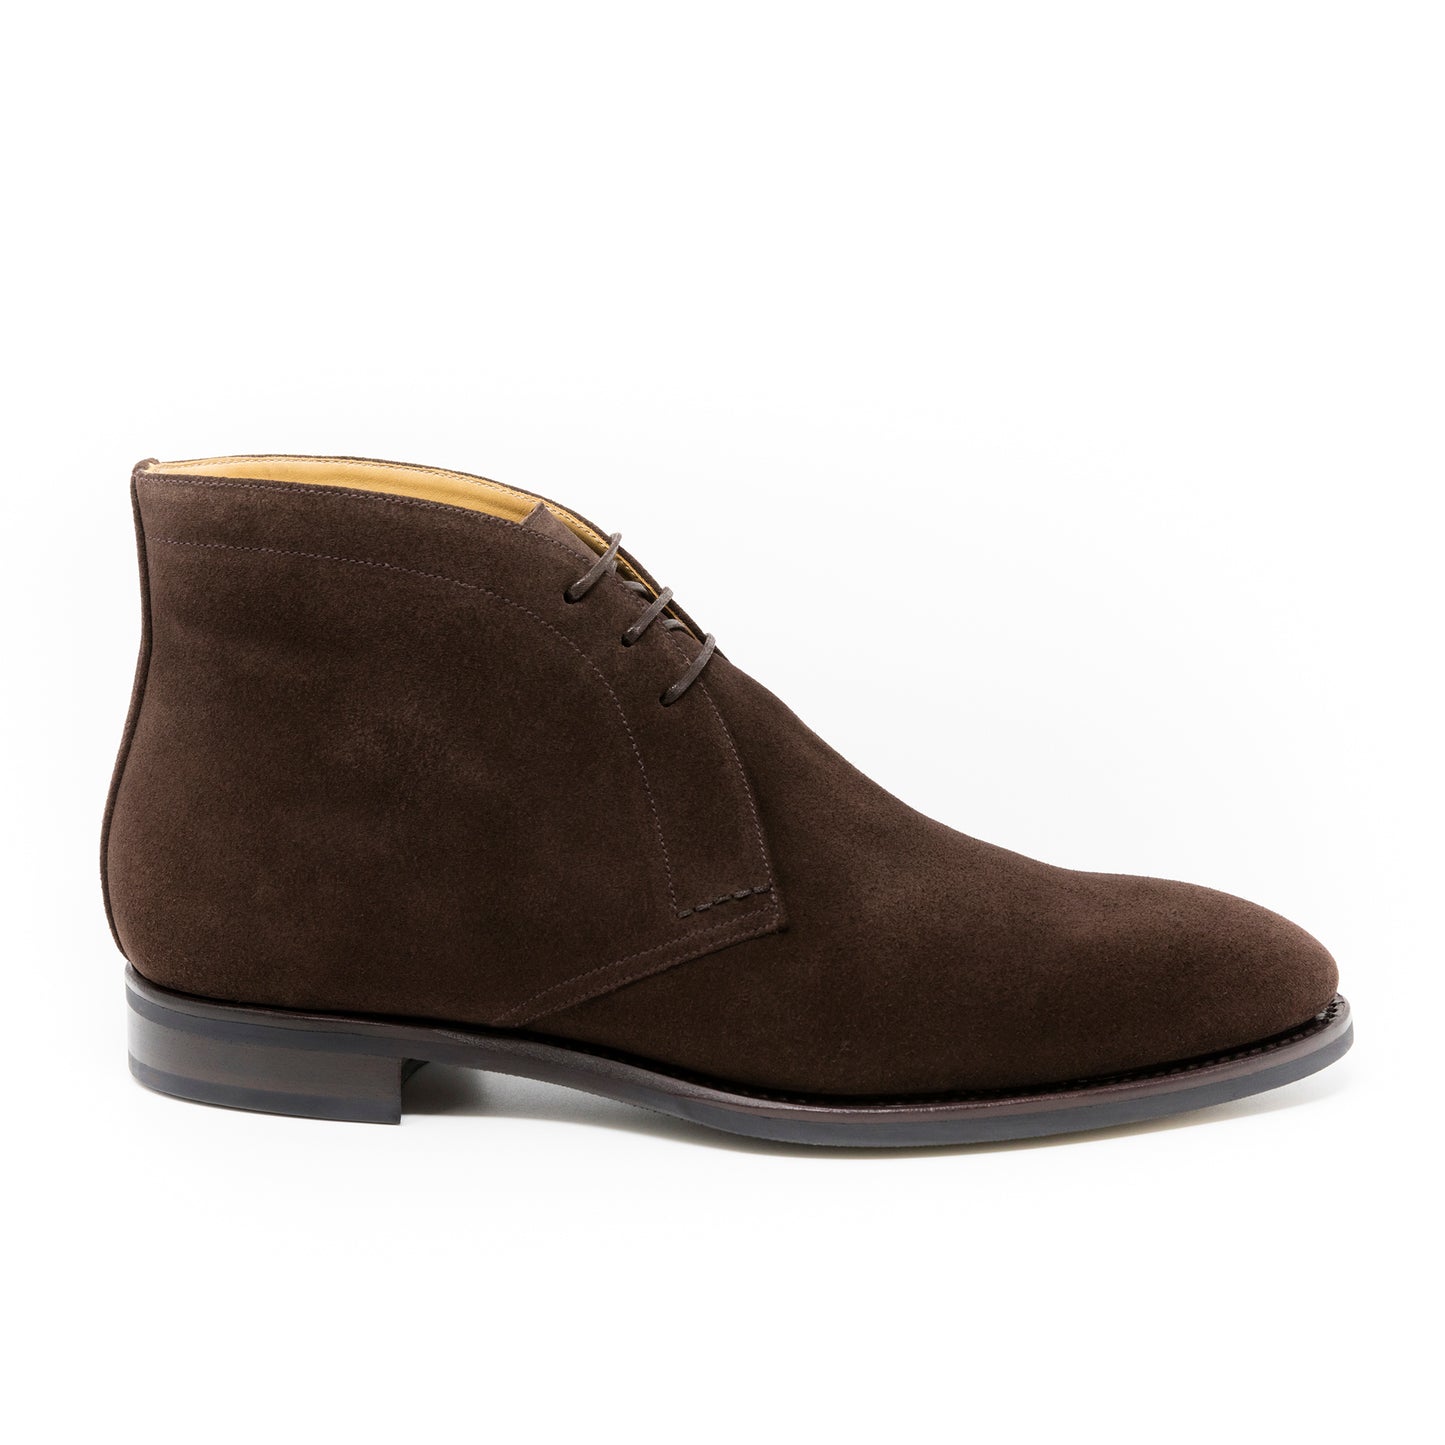 TLB Mallorca leather shoes 133 / GOYA / SUEDE BROWN